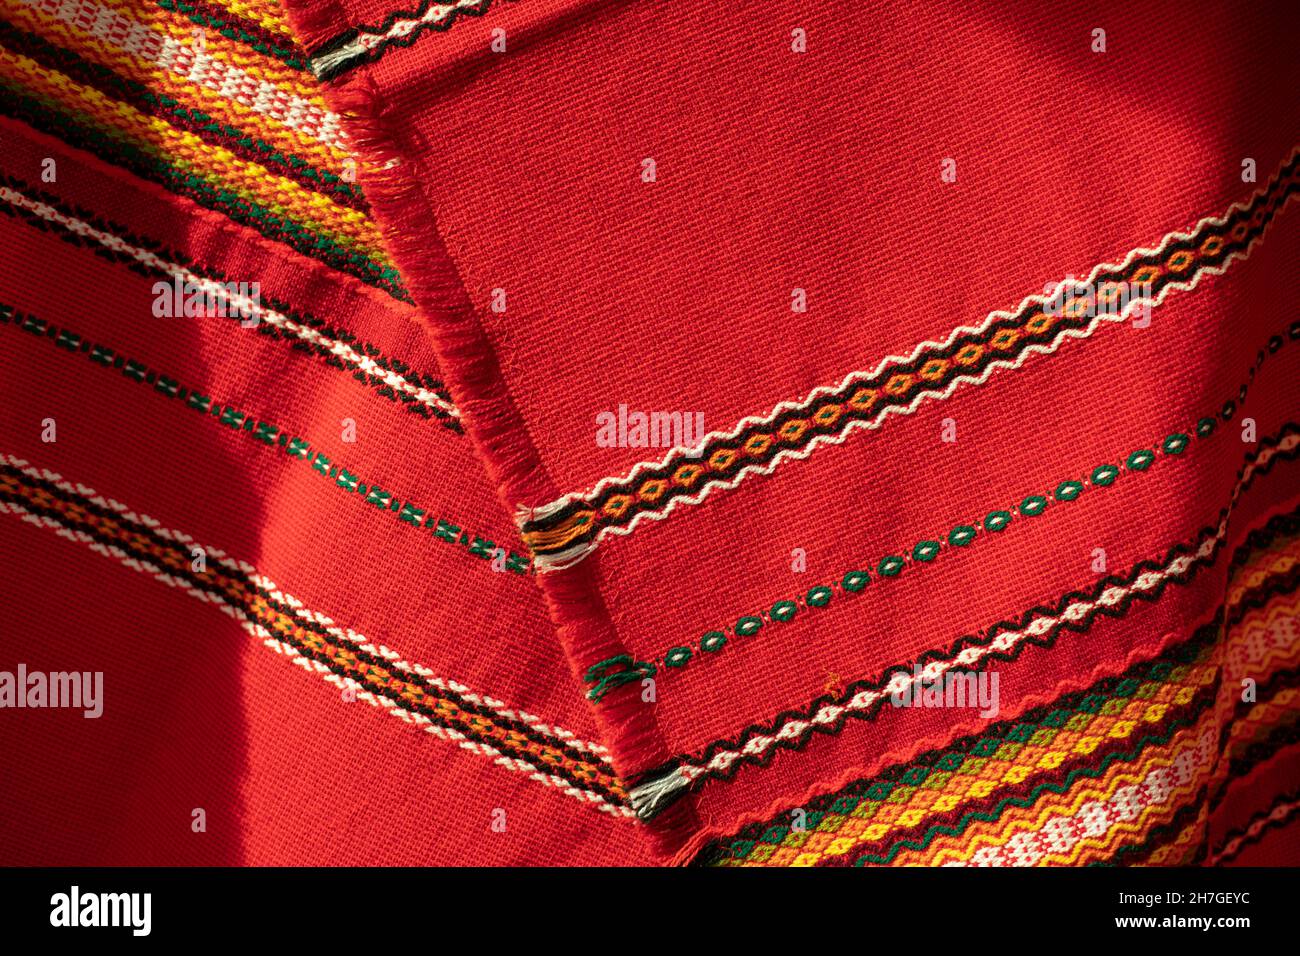 Red tablecloth in Russia. Folk pattern on the fabric. Fabric material in the Slavic peoples. National patterns from rustic weaving. Stock Photo